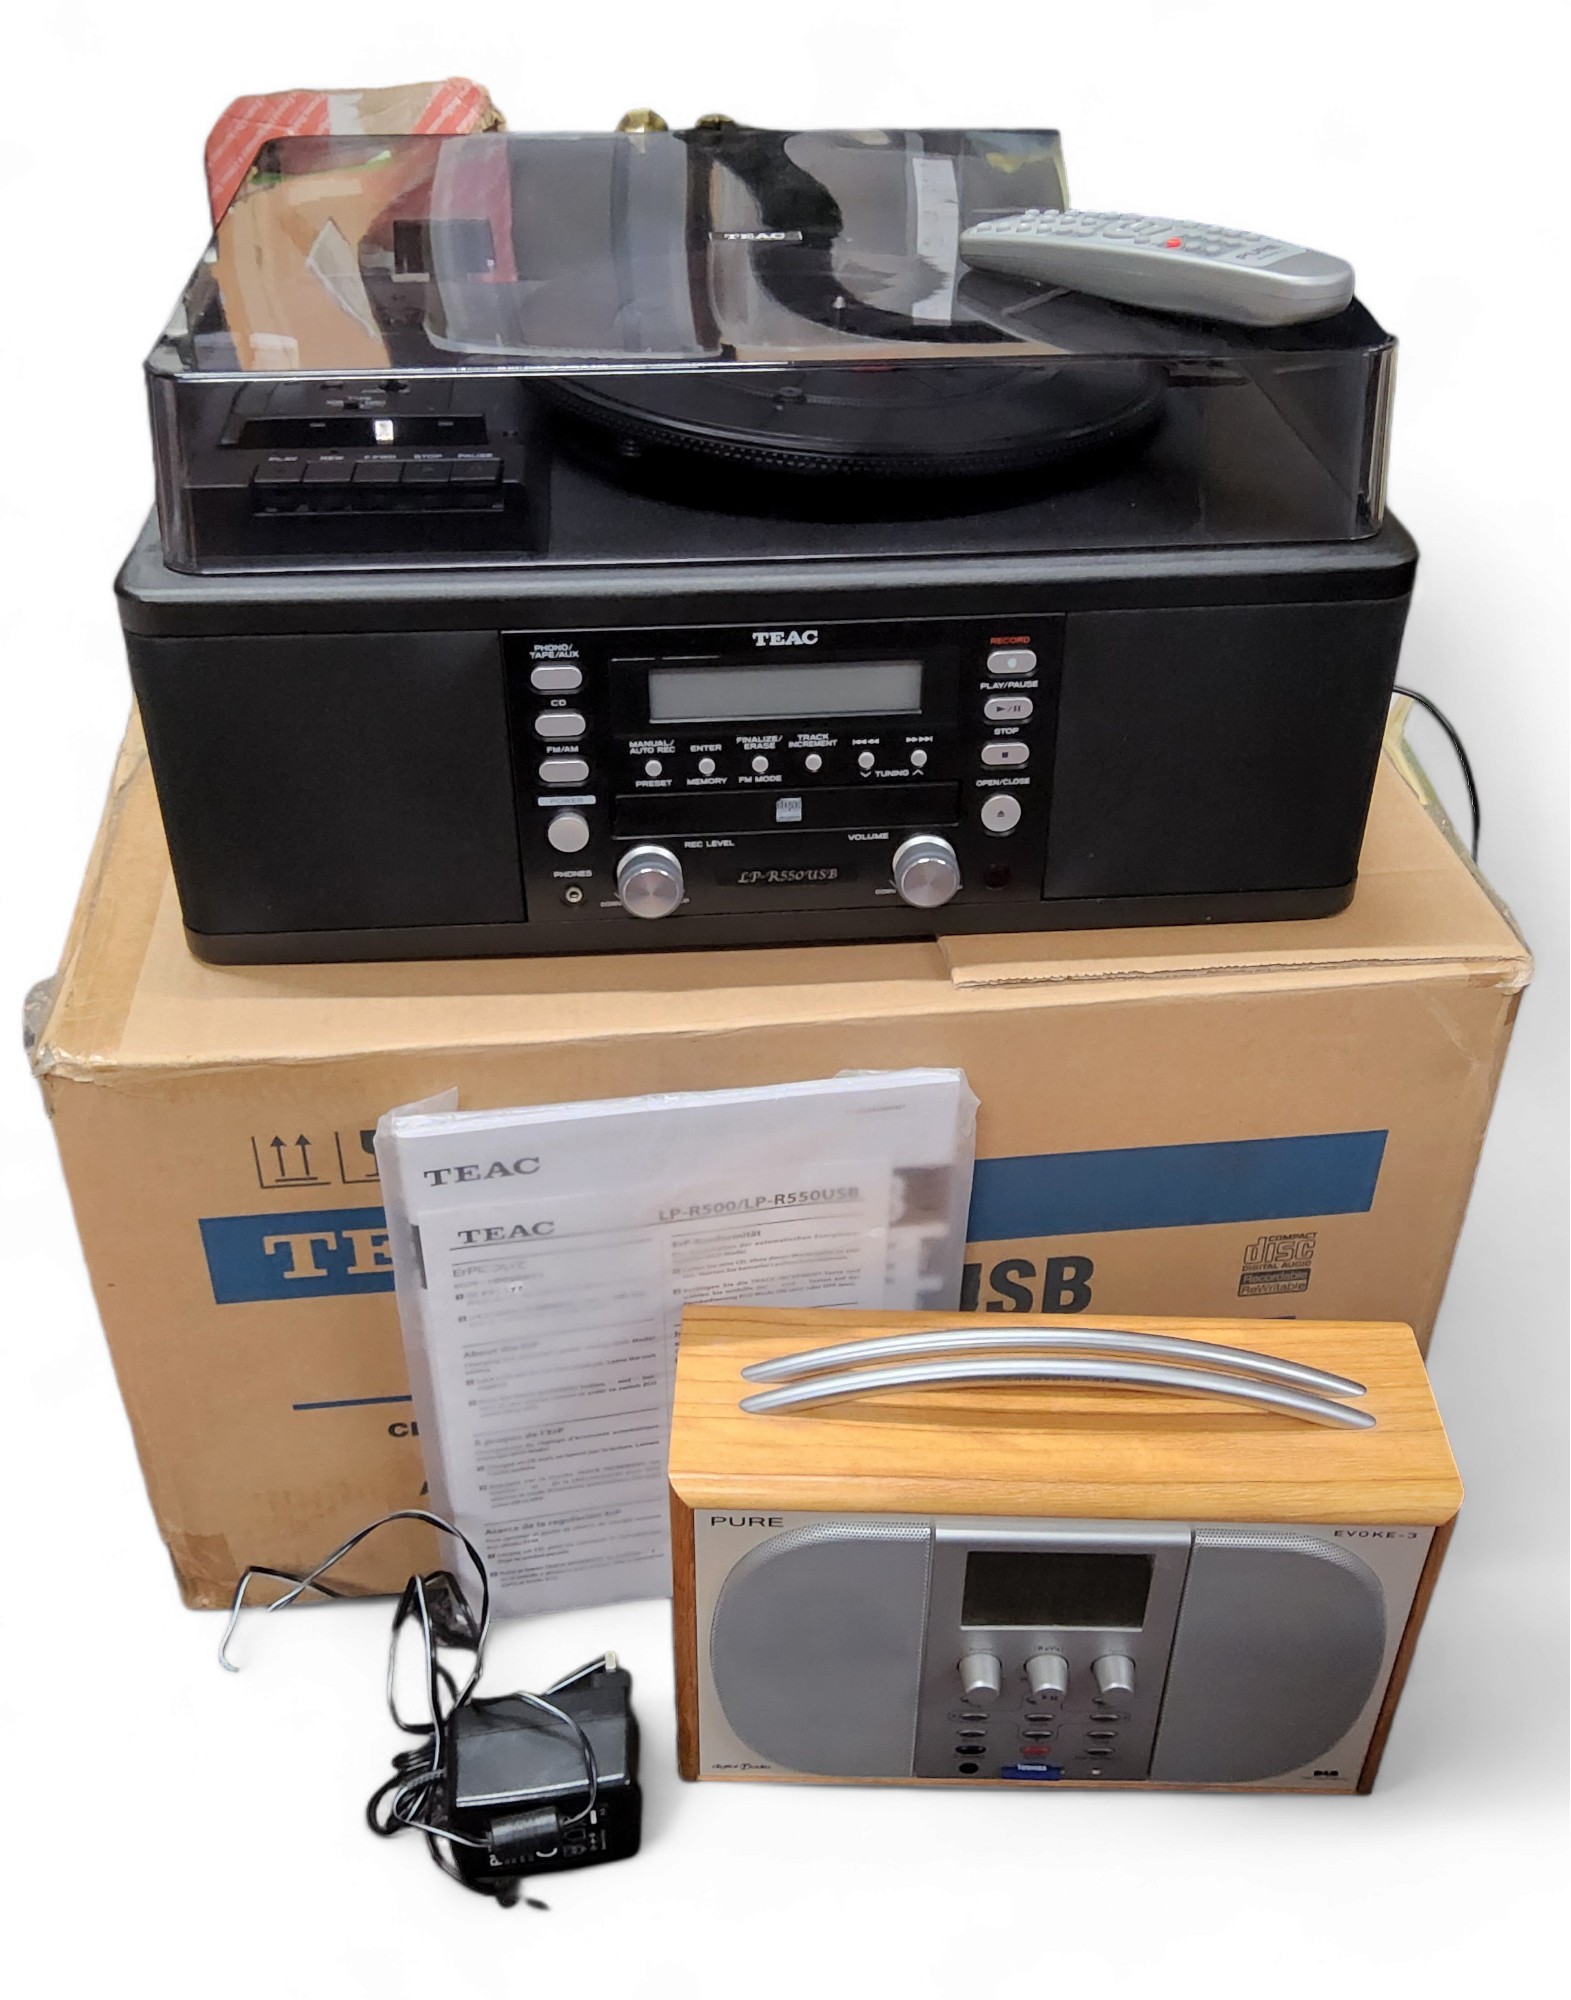 TEAC LP-R550USB USB/CD Recorder with Cassette and Turntable, Black, instructions, in original box; a